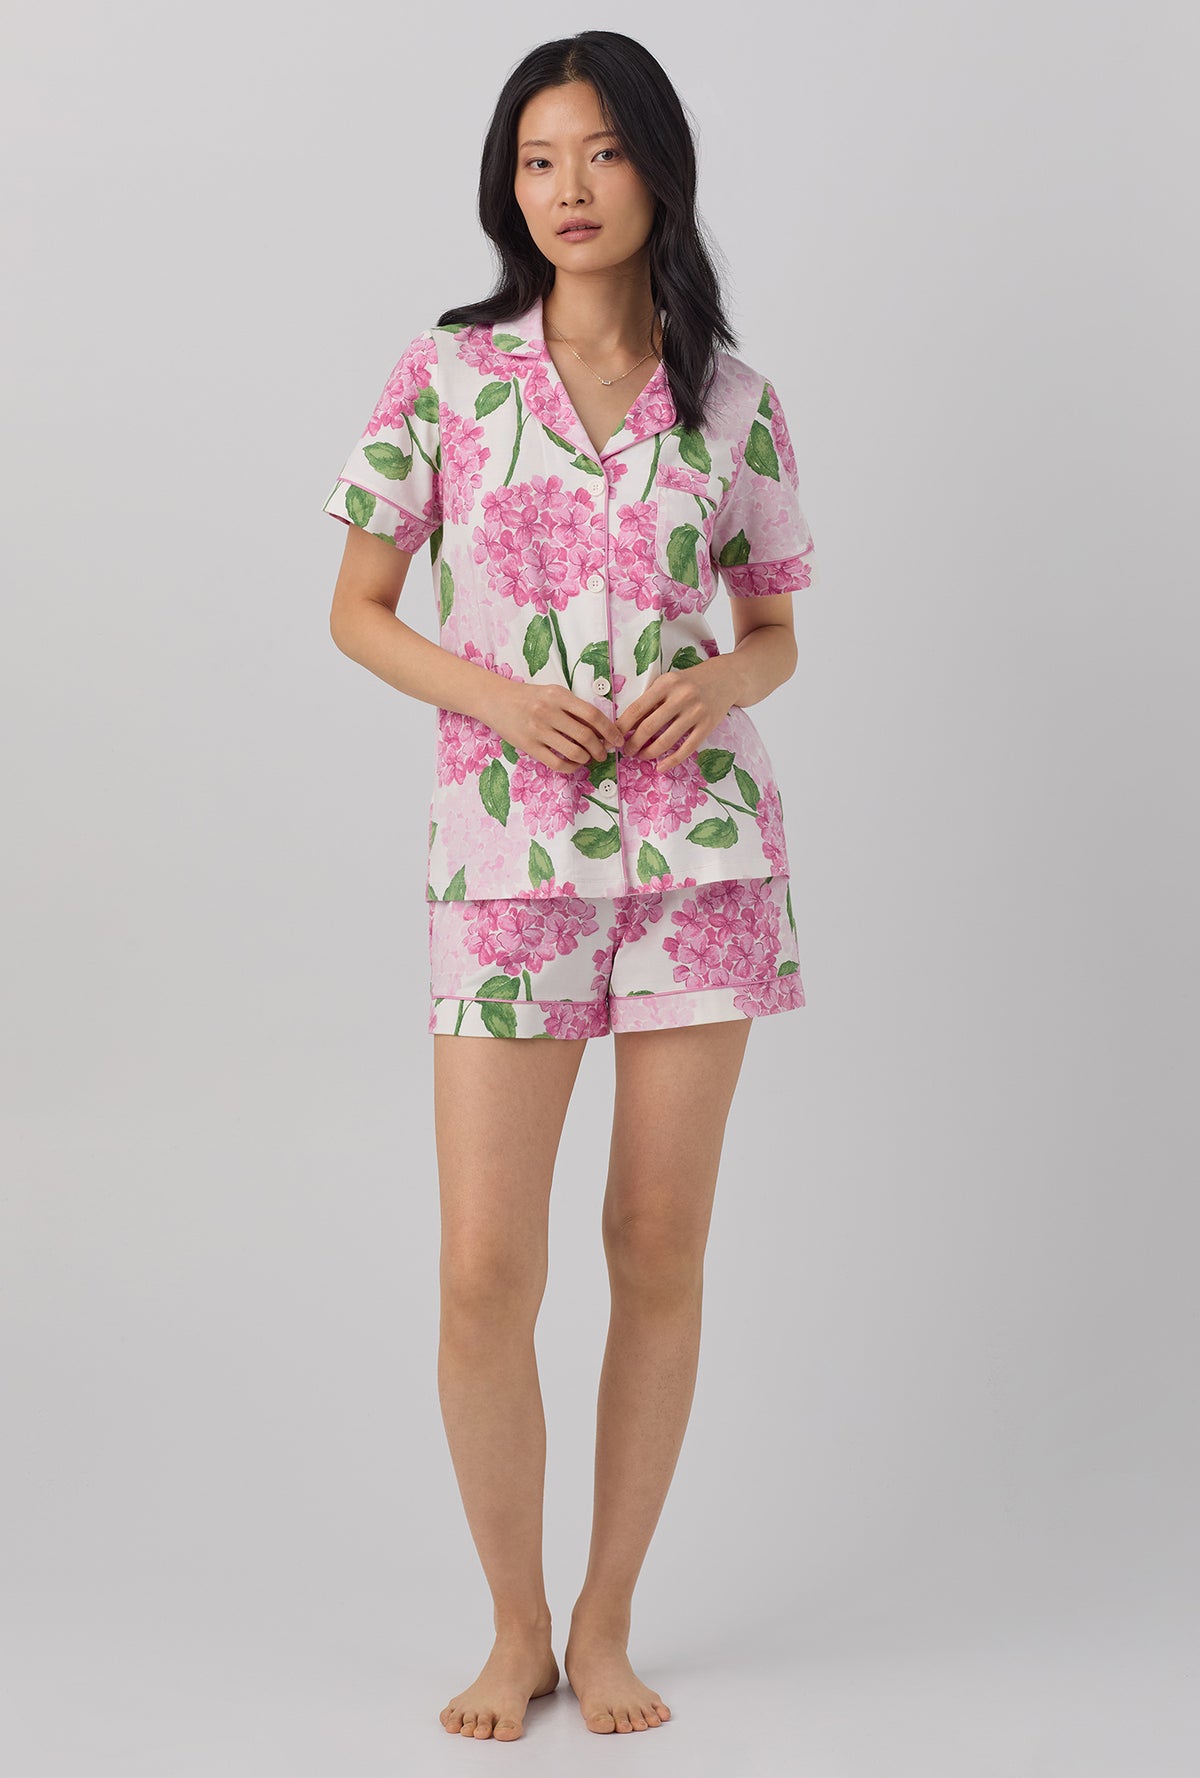 A lady wearing pink  Short Sleeve Classic Shorty Stretch Jersey PJ Set with Grand Hydrangea print.